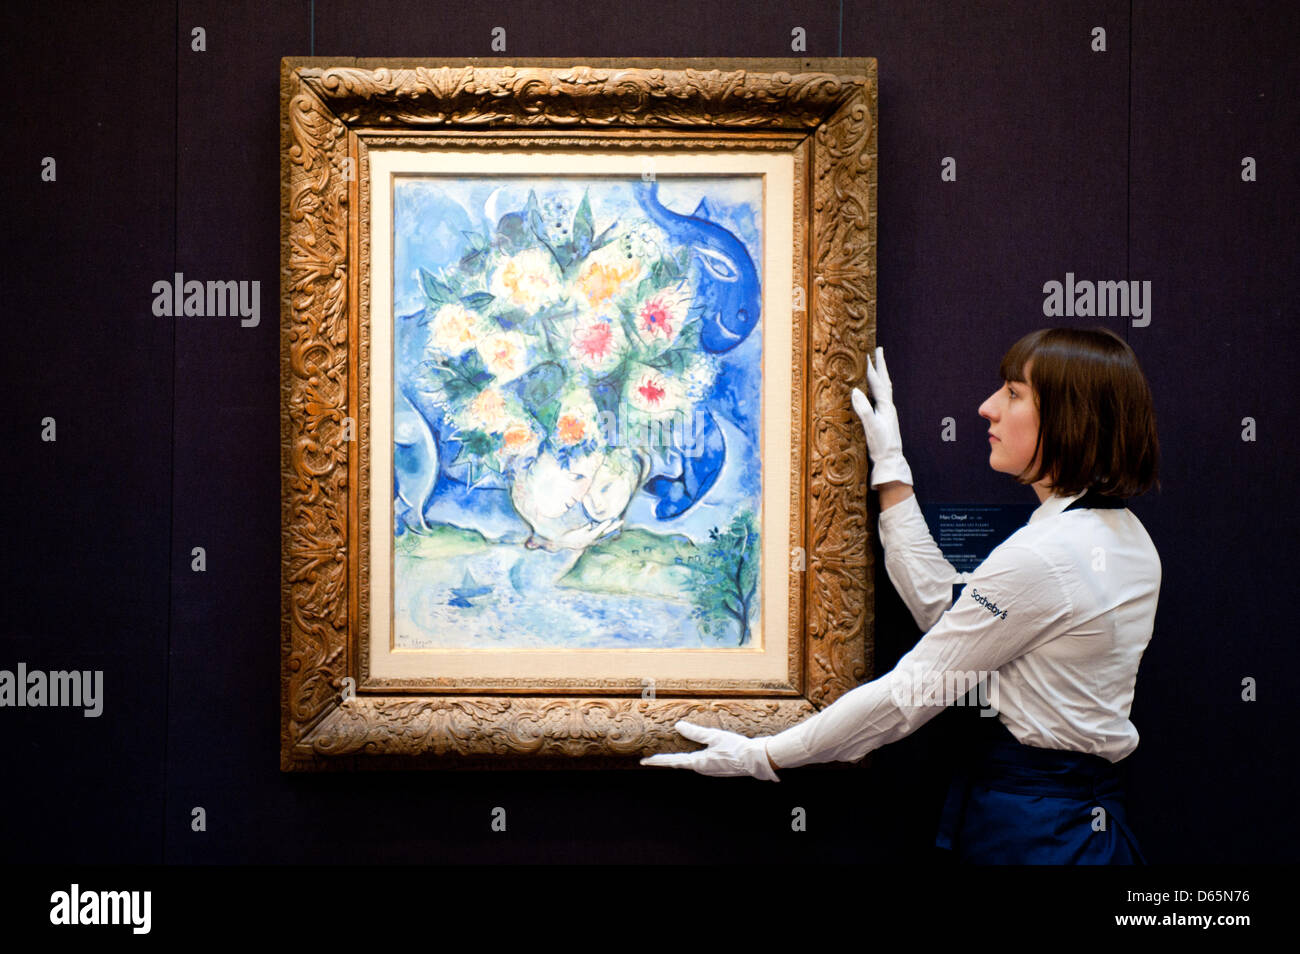 London, UK. 12th April 2013. A Sotheby's employee poses in front of  Marc chagall 'Pommes et Poires 1882-1885' (Est. $1-1,5 million). The work will go on sale at Sotheby’s New York in May 2013. The Blockbuster sales at include works by Richter, Modigliani, Picasso, Rodin, Bacon, Cezanne. Credit: Piero Cruciatti / Alamy Live News Stock Photo